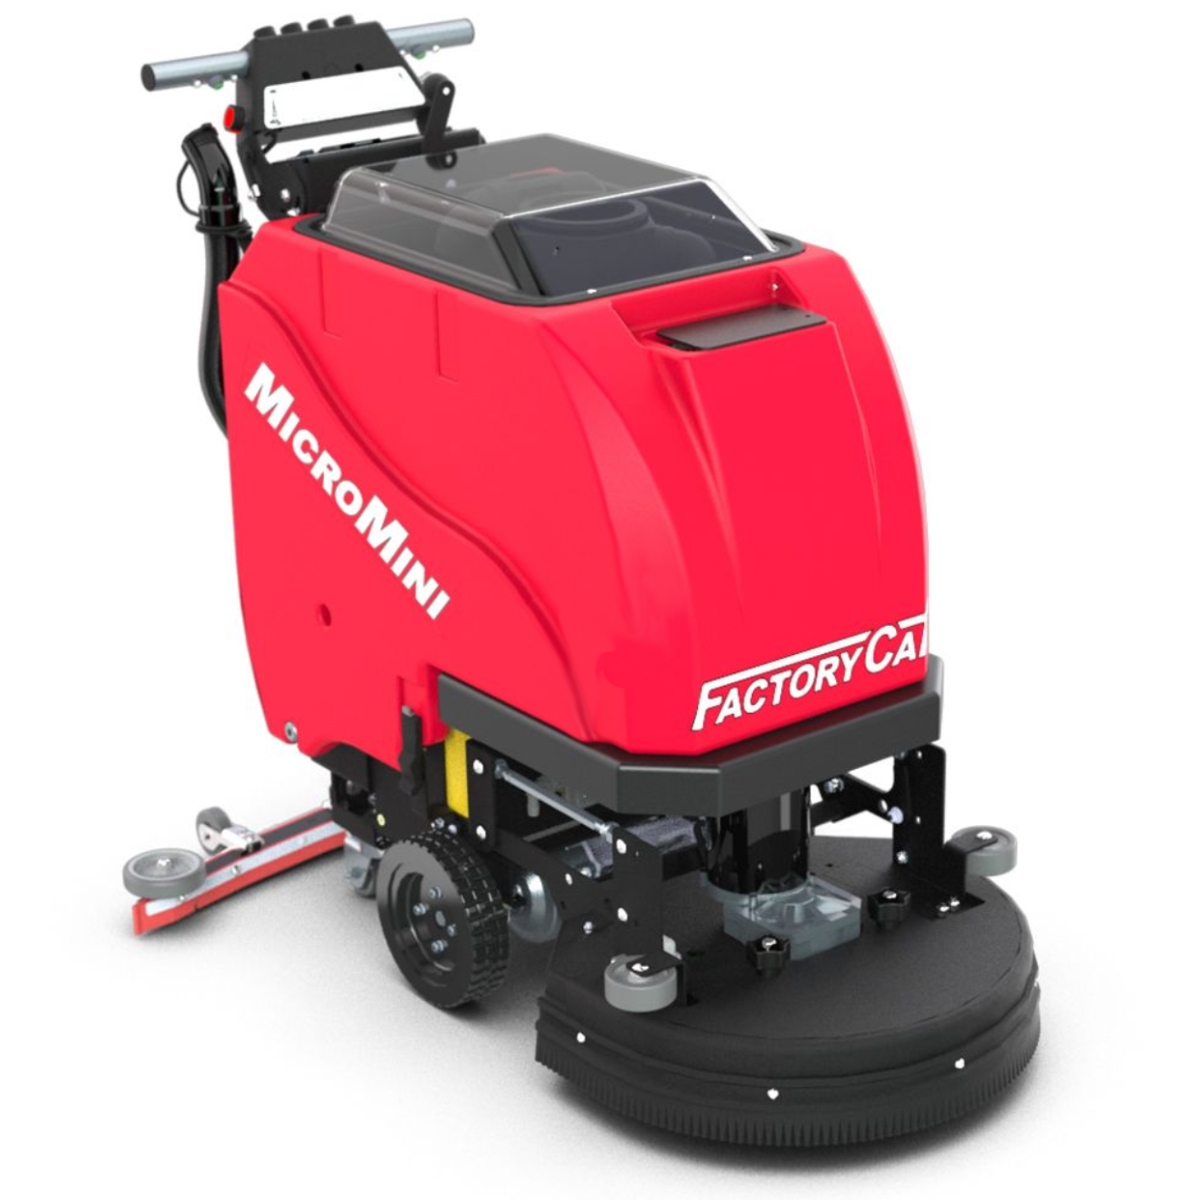 FactoryCat's MICROMINI Floor Scrubber Dryer is known for its simple design and durable construction, offering unmatched value for the customer.